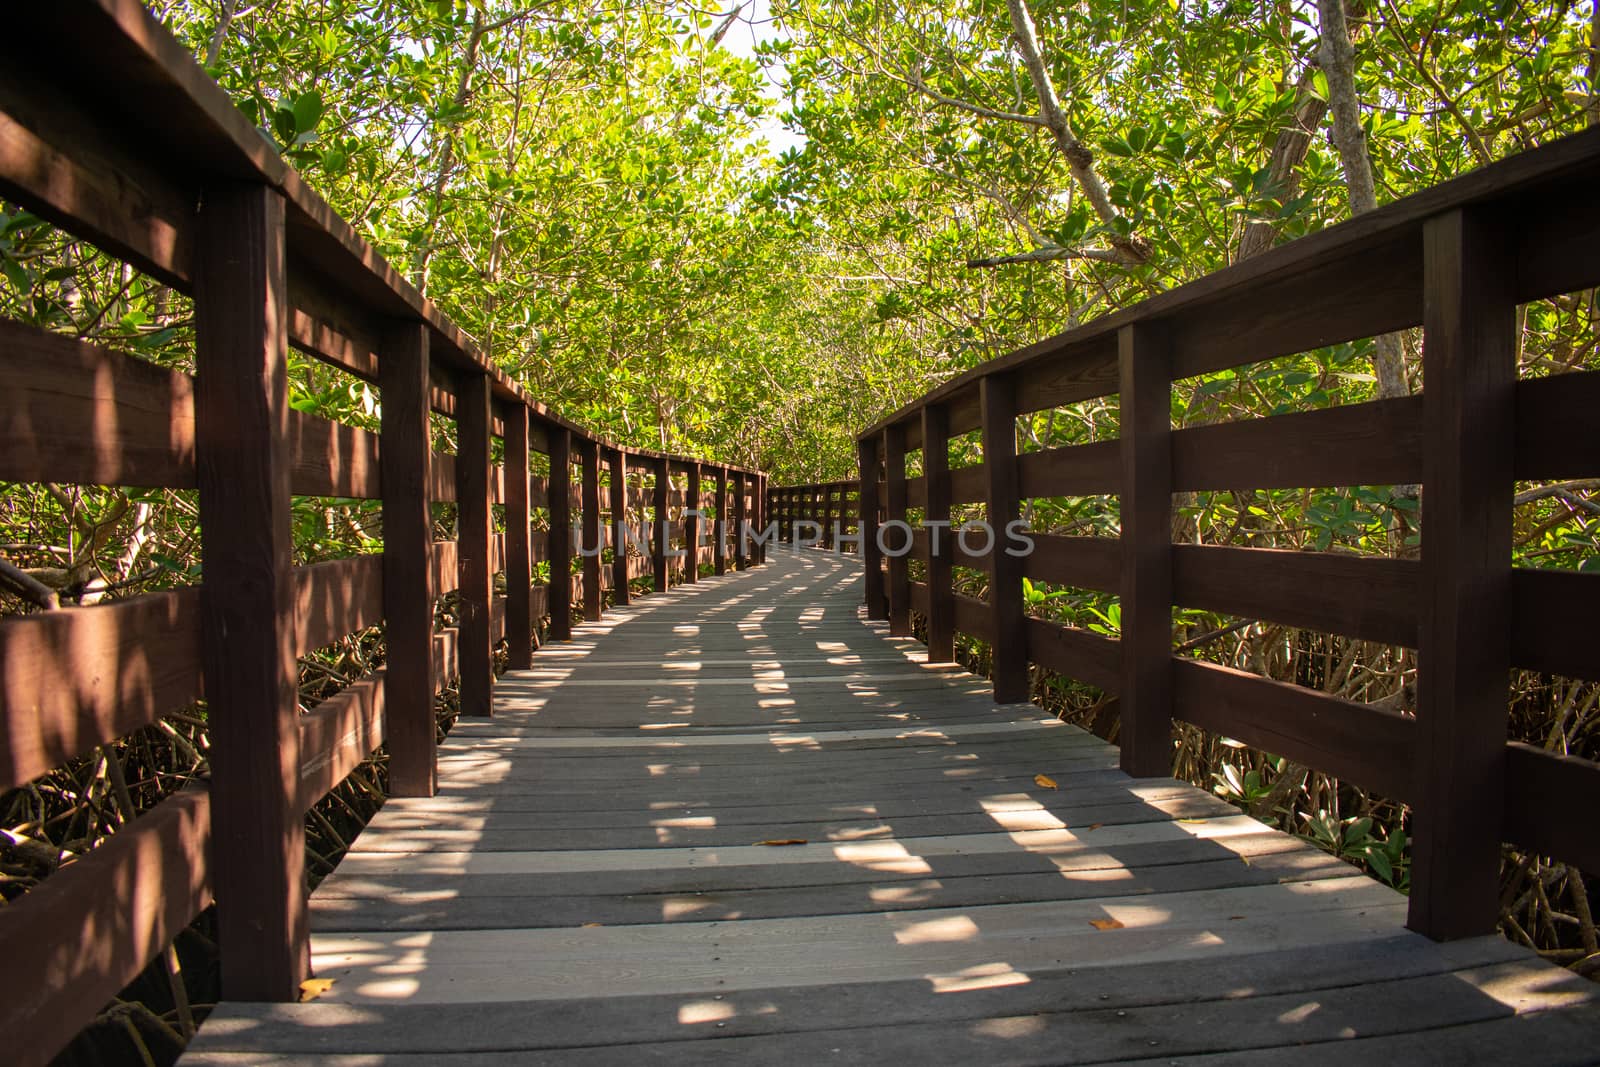 A Boardwalk Going Through a Lush and Bright Green Forest